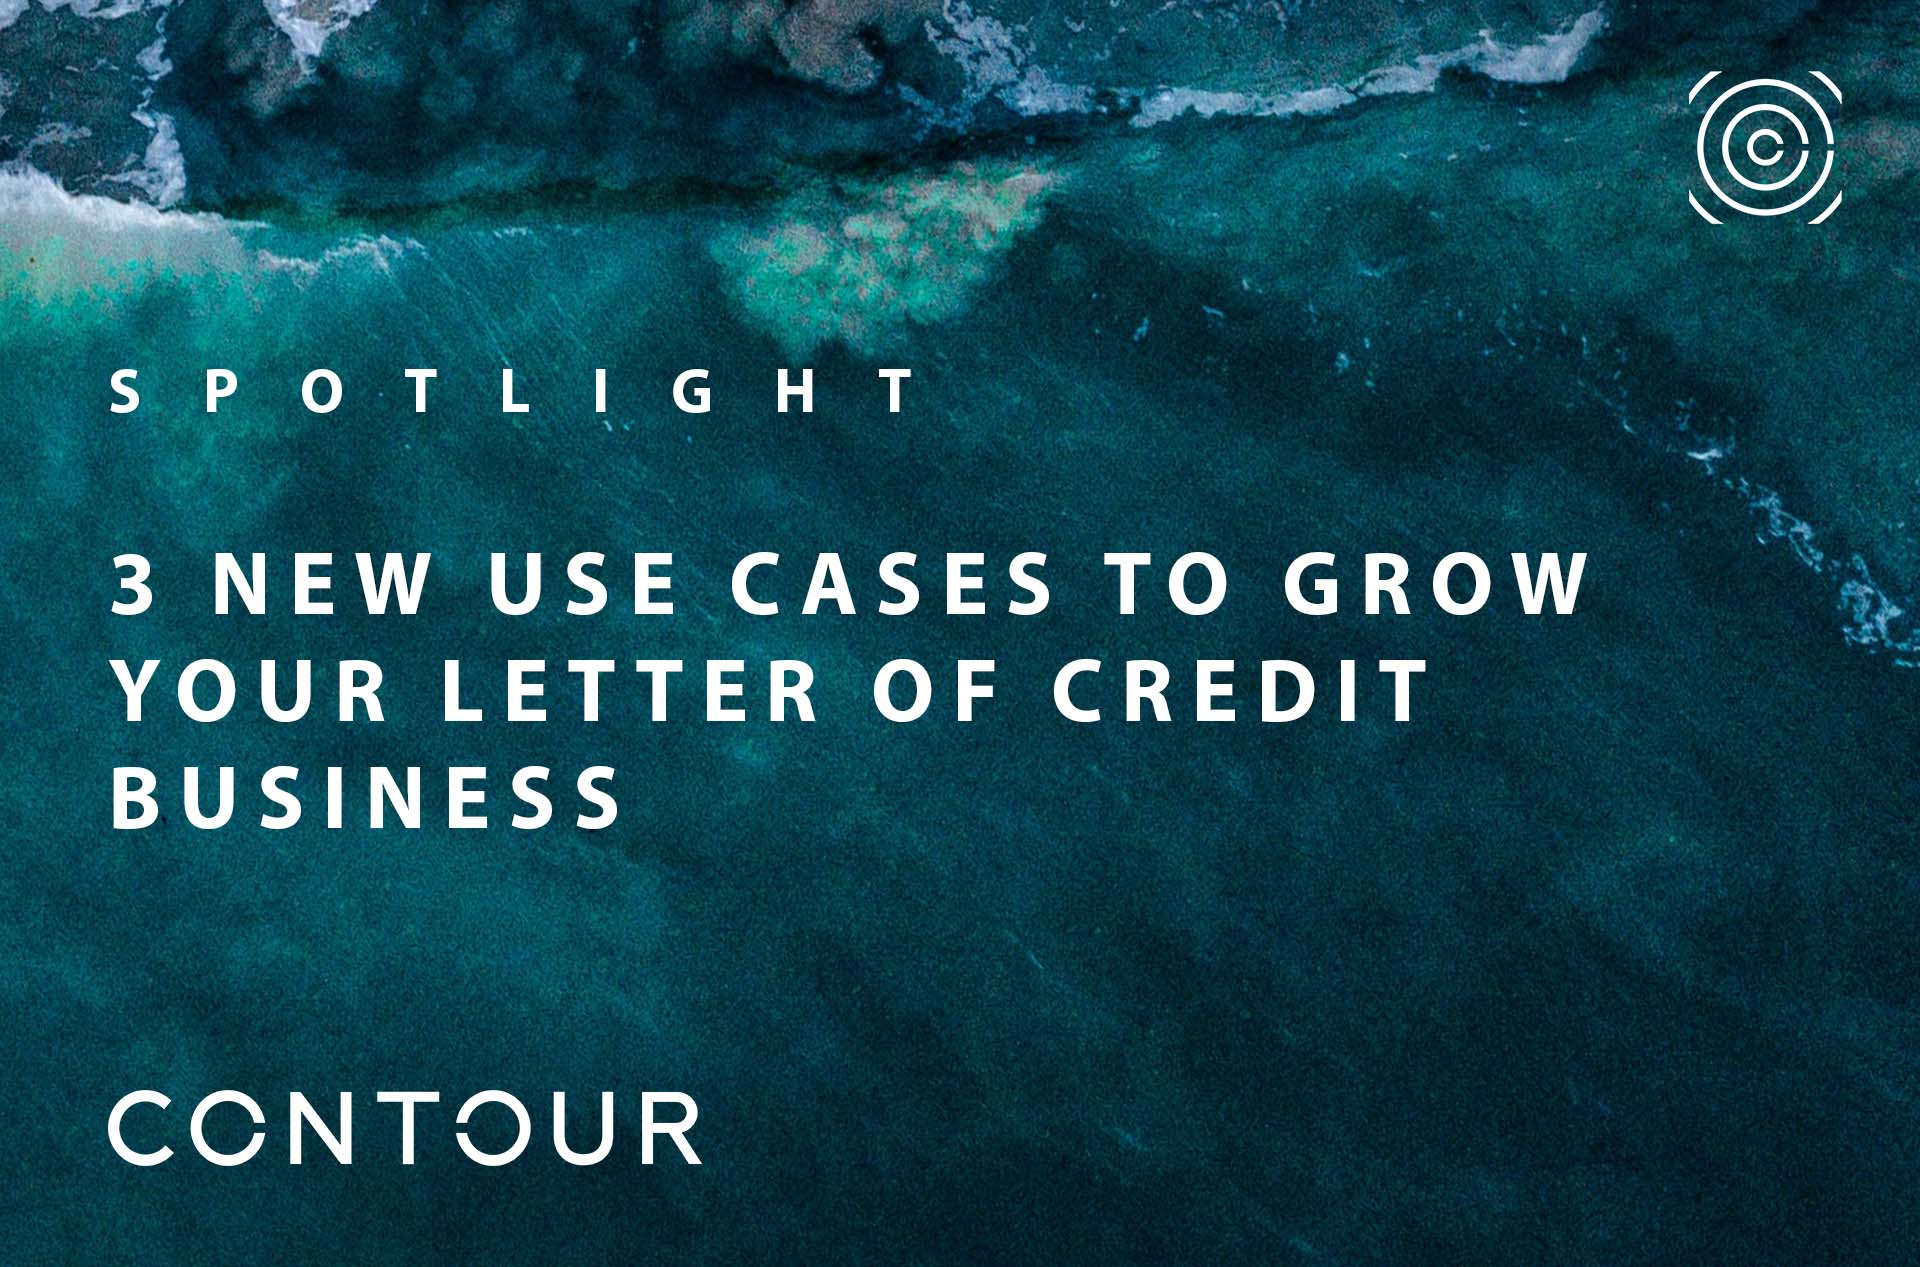 3 new use cases to grow your Letter of Credit business